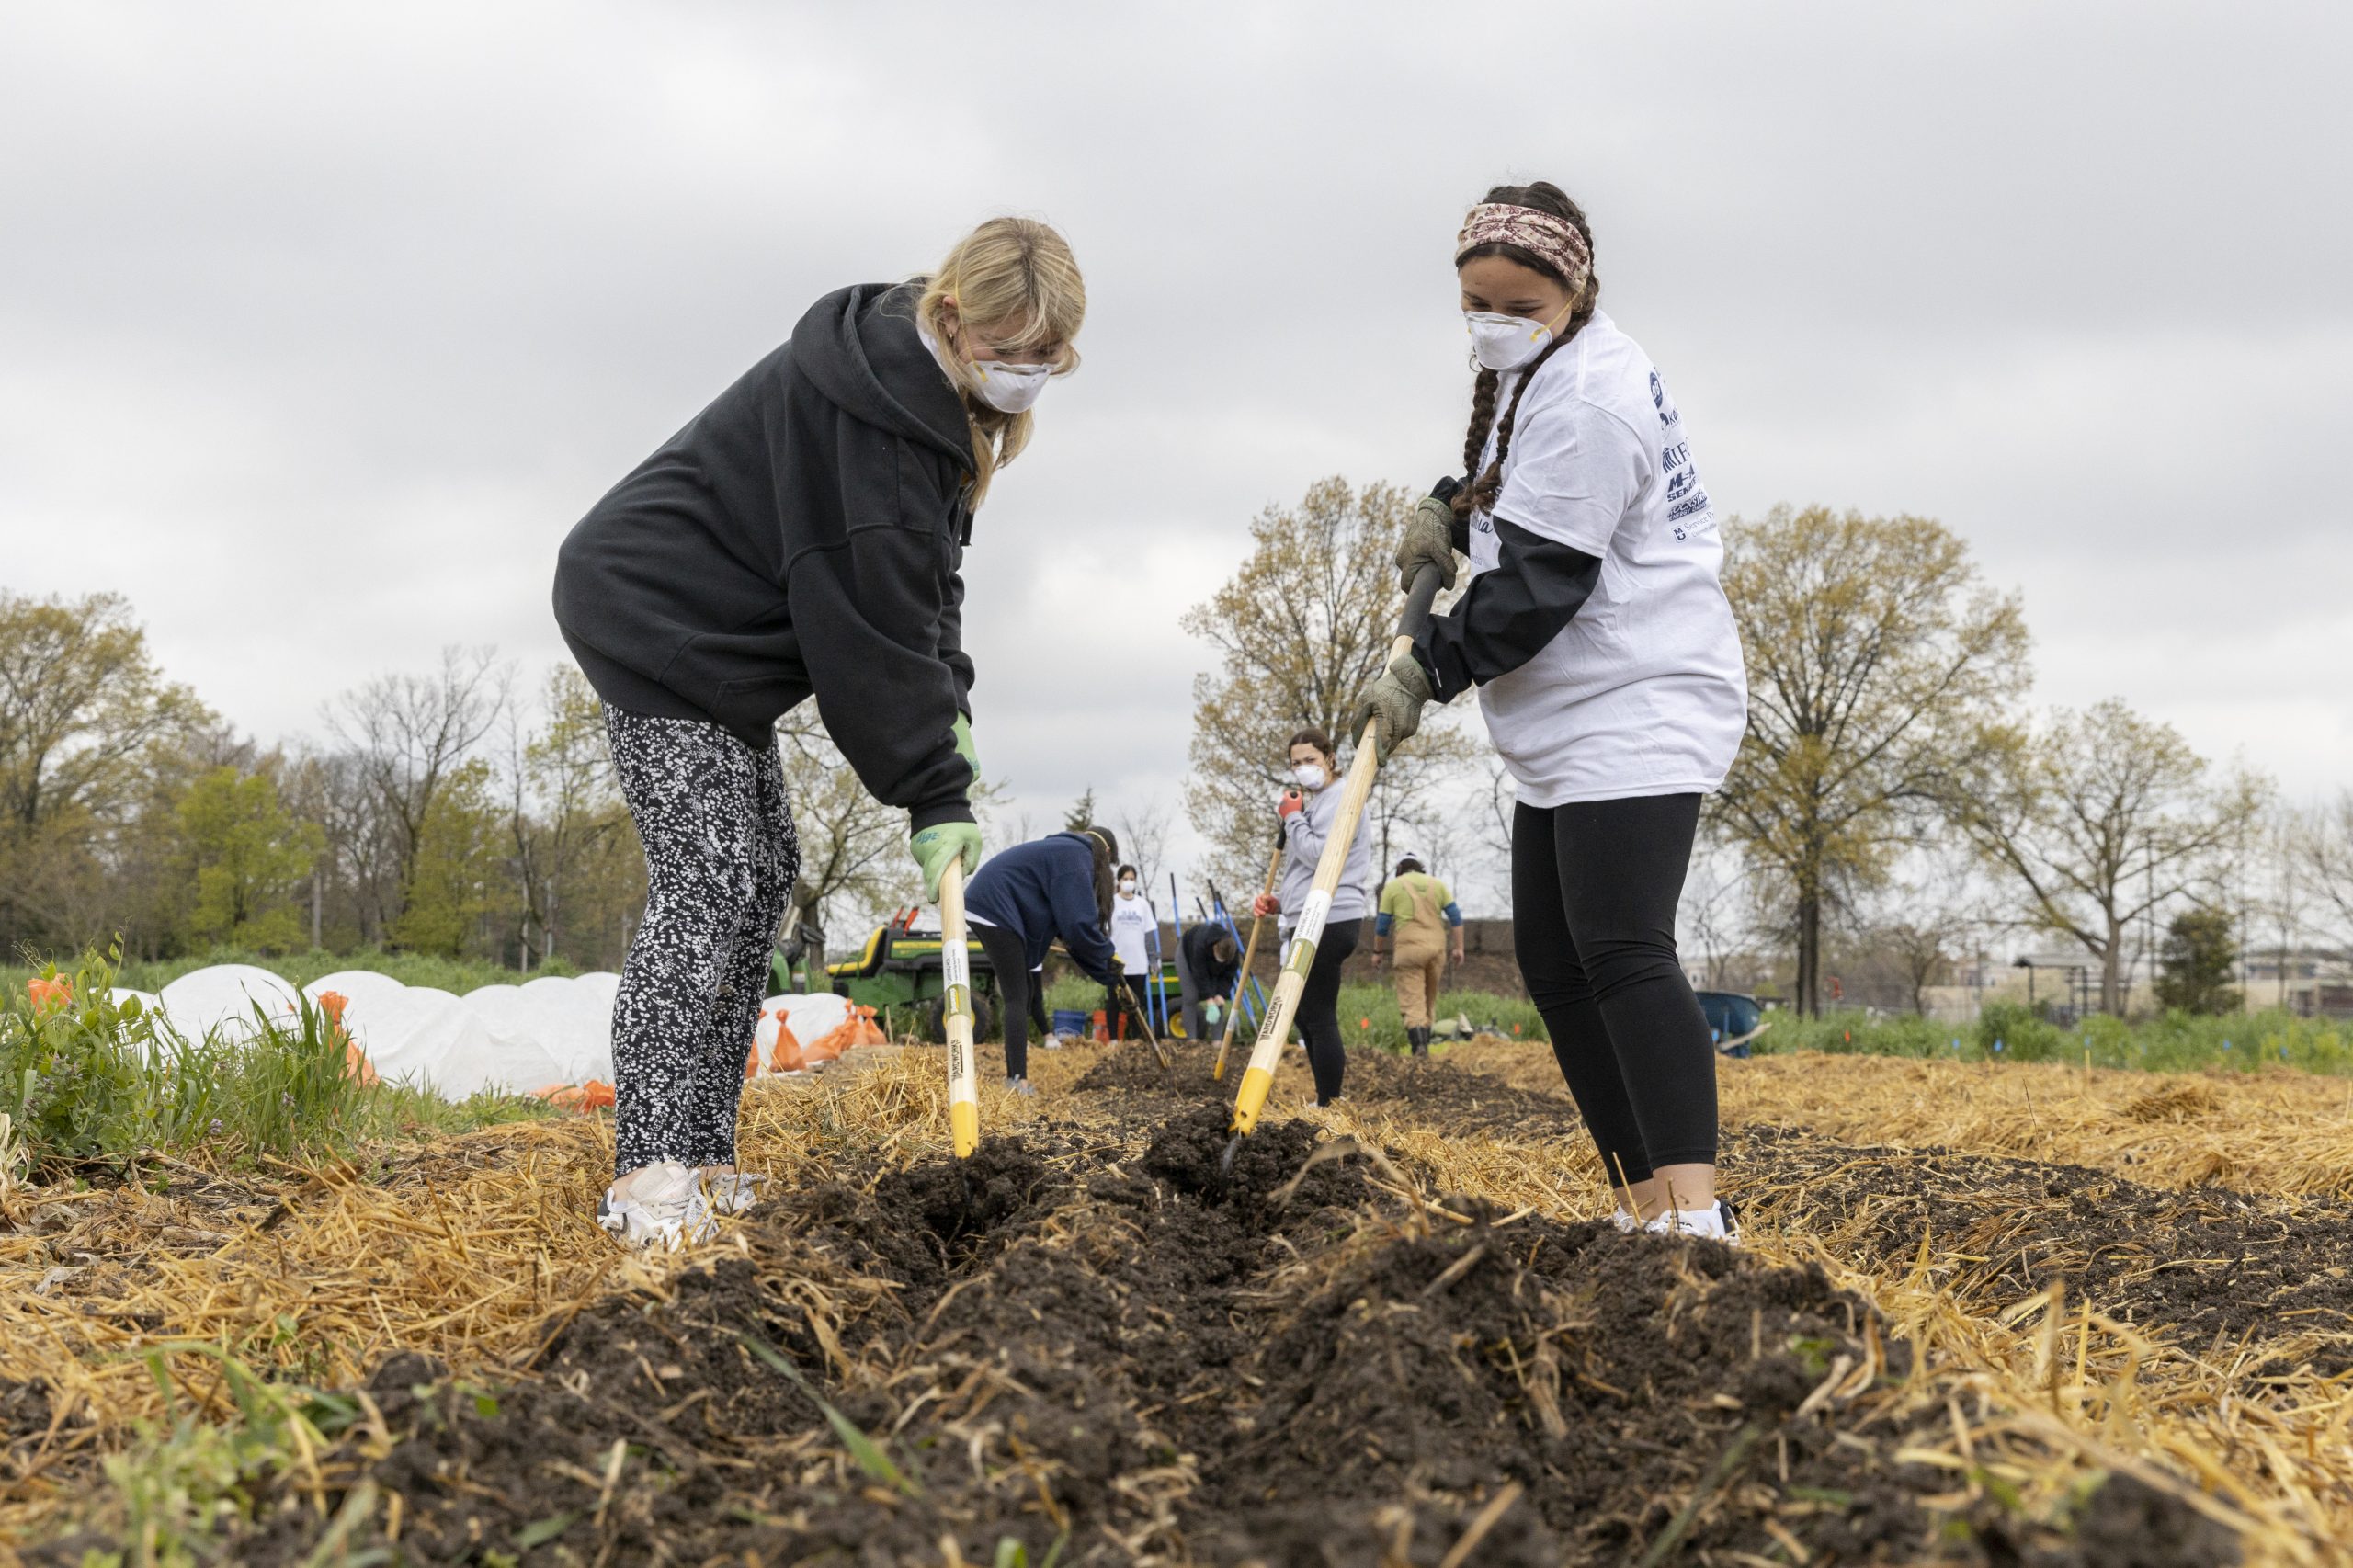 Students volunteer their time to help the Columbia Center for Urban Agriculture